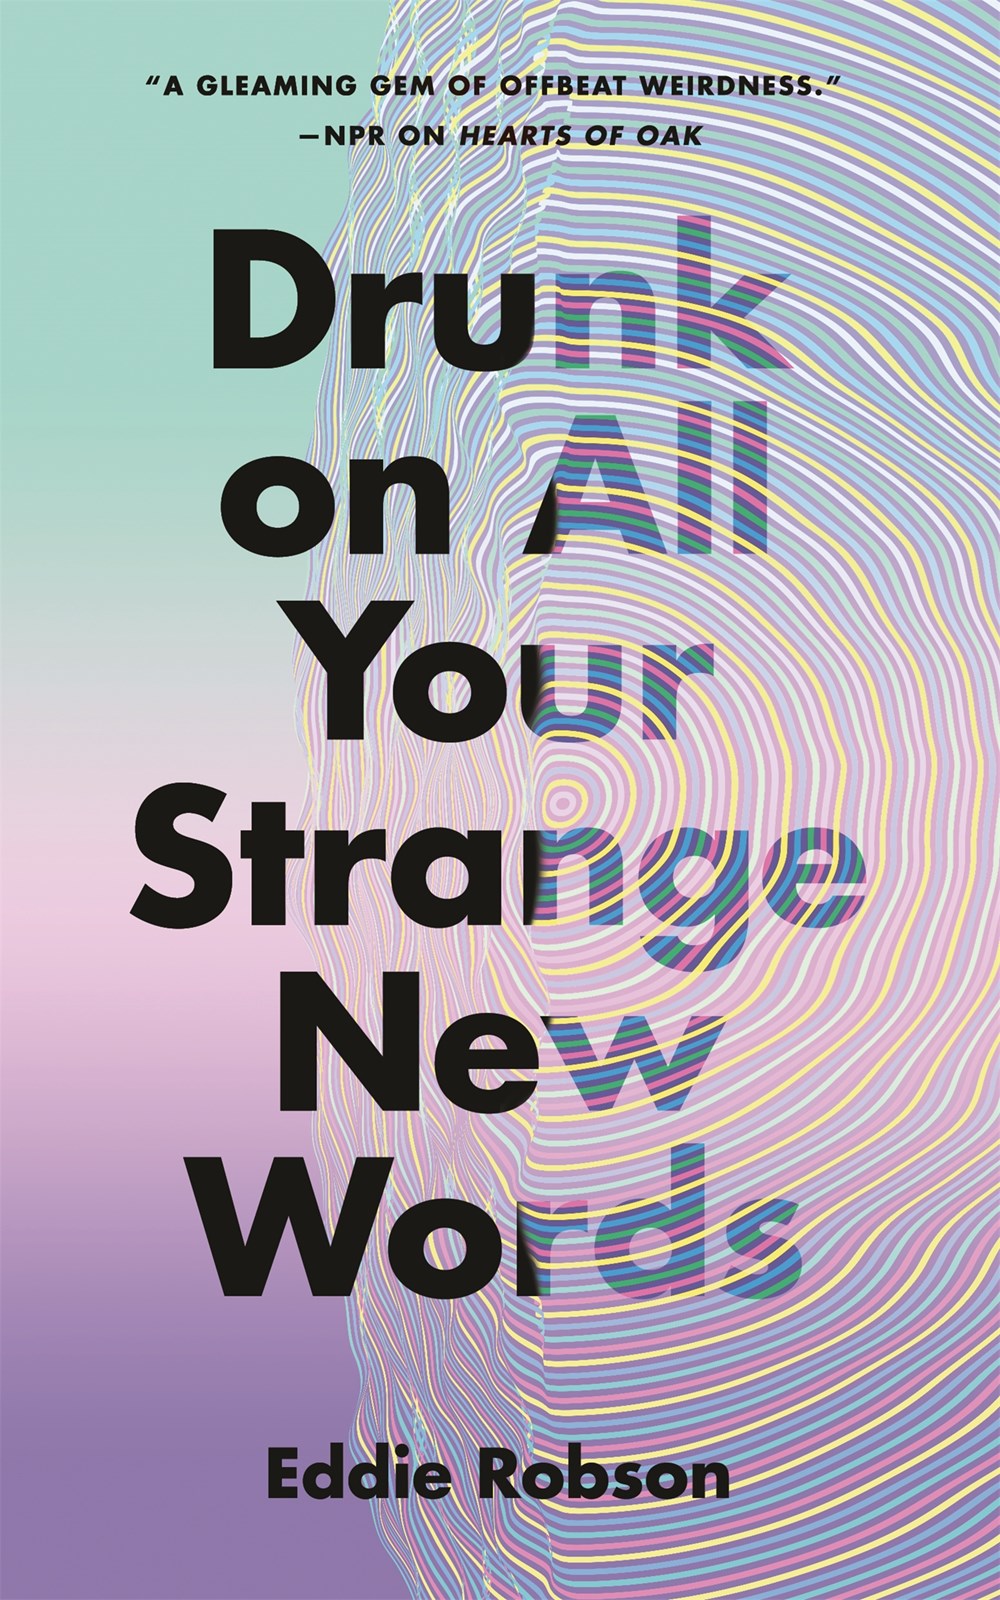 Drunk on All Your Strange New Words by Eddie Robson